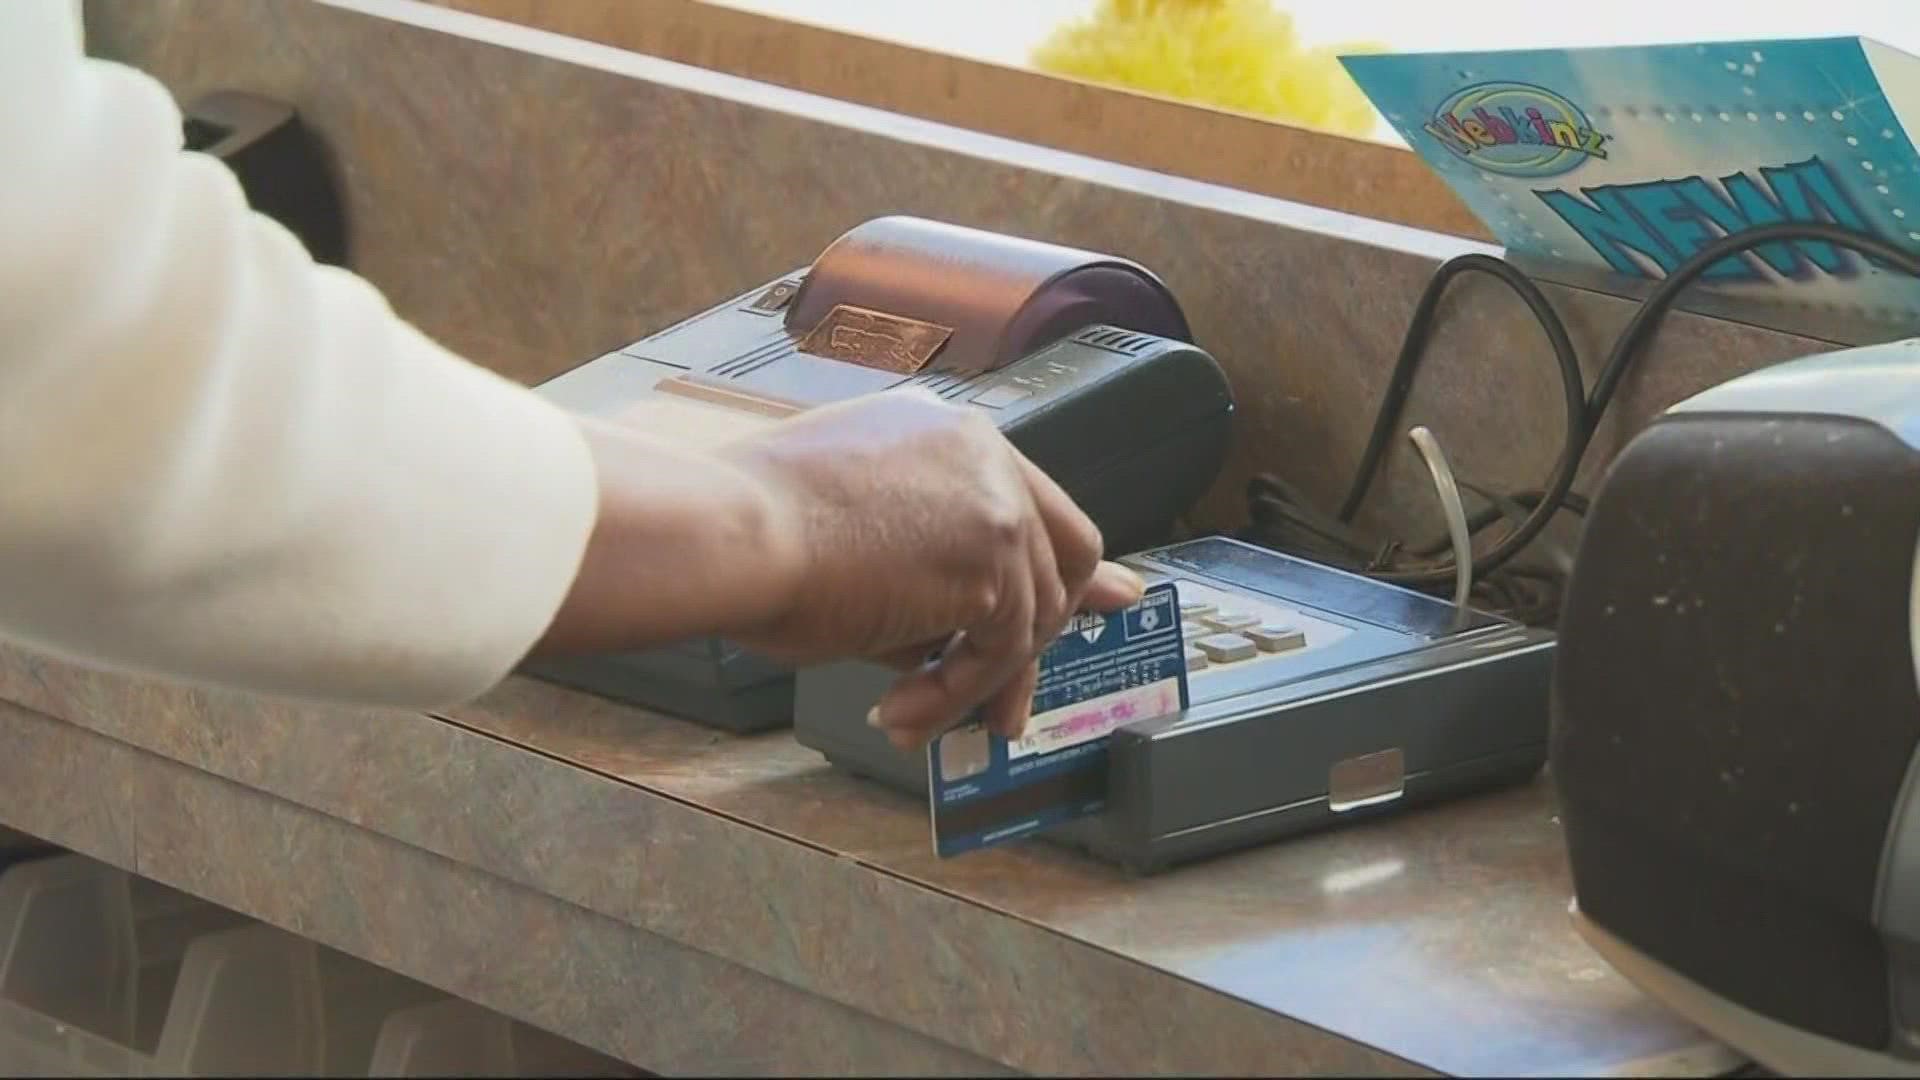 The department of social and health services is warning EBT-card users that they're being targeted and card skimming crime is on the rise.